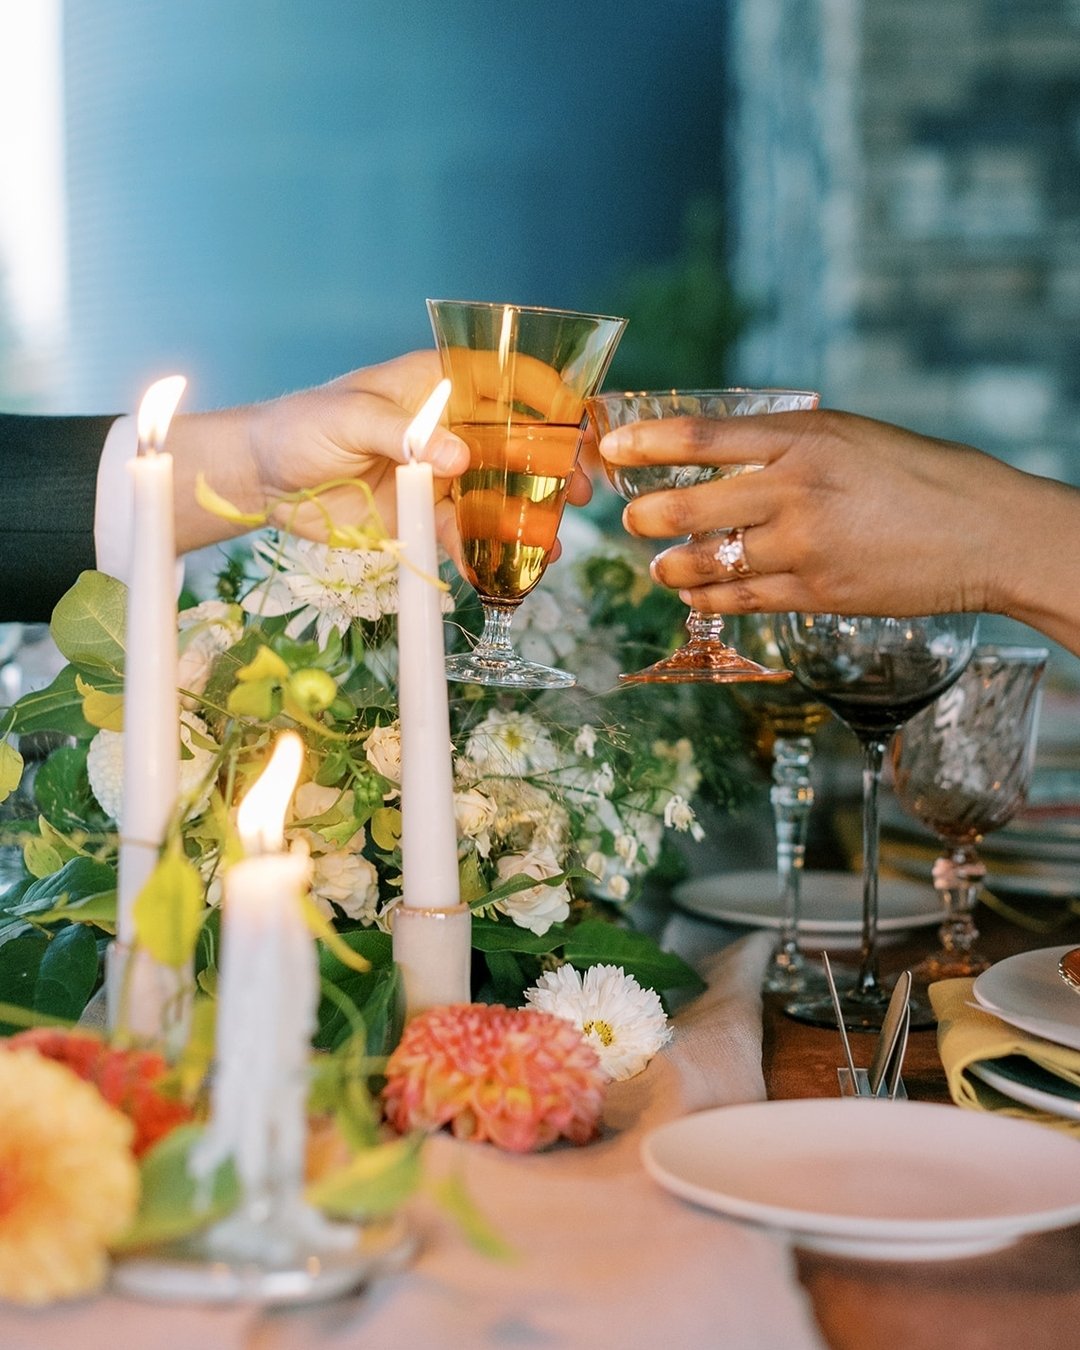 Cheers to the weekend! What do you have going on this weekend? We luckily have a low-key schedule before May starts and summer sports begin! 

#coloradowedding #coloradoweddingflorist #coloradoflorist #mountainwedding #mountainweddingflorist #mountai